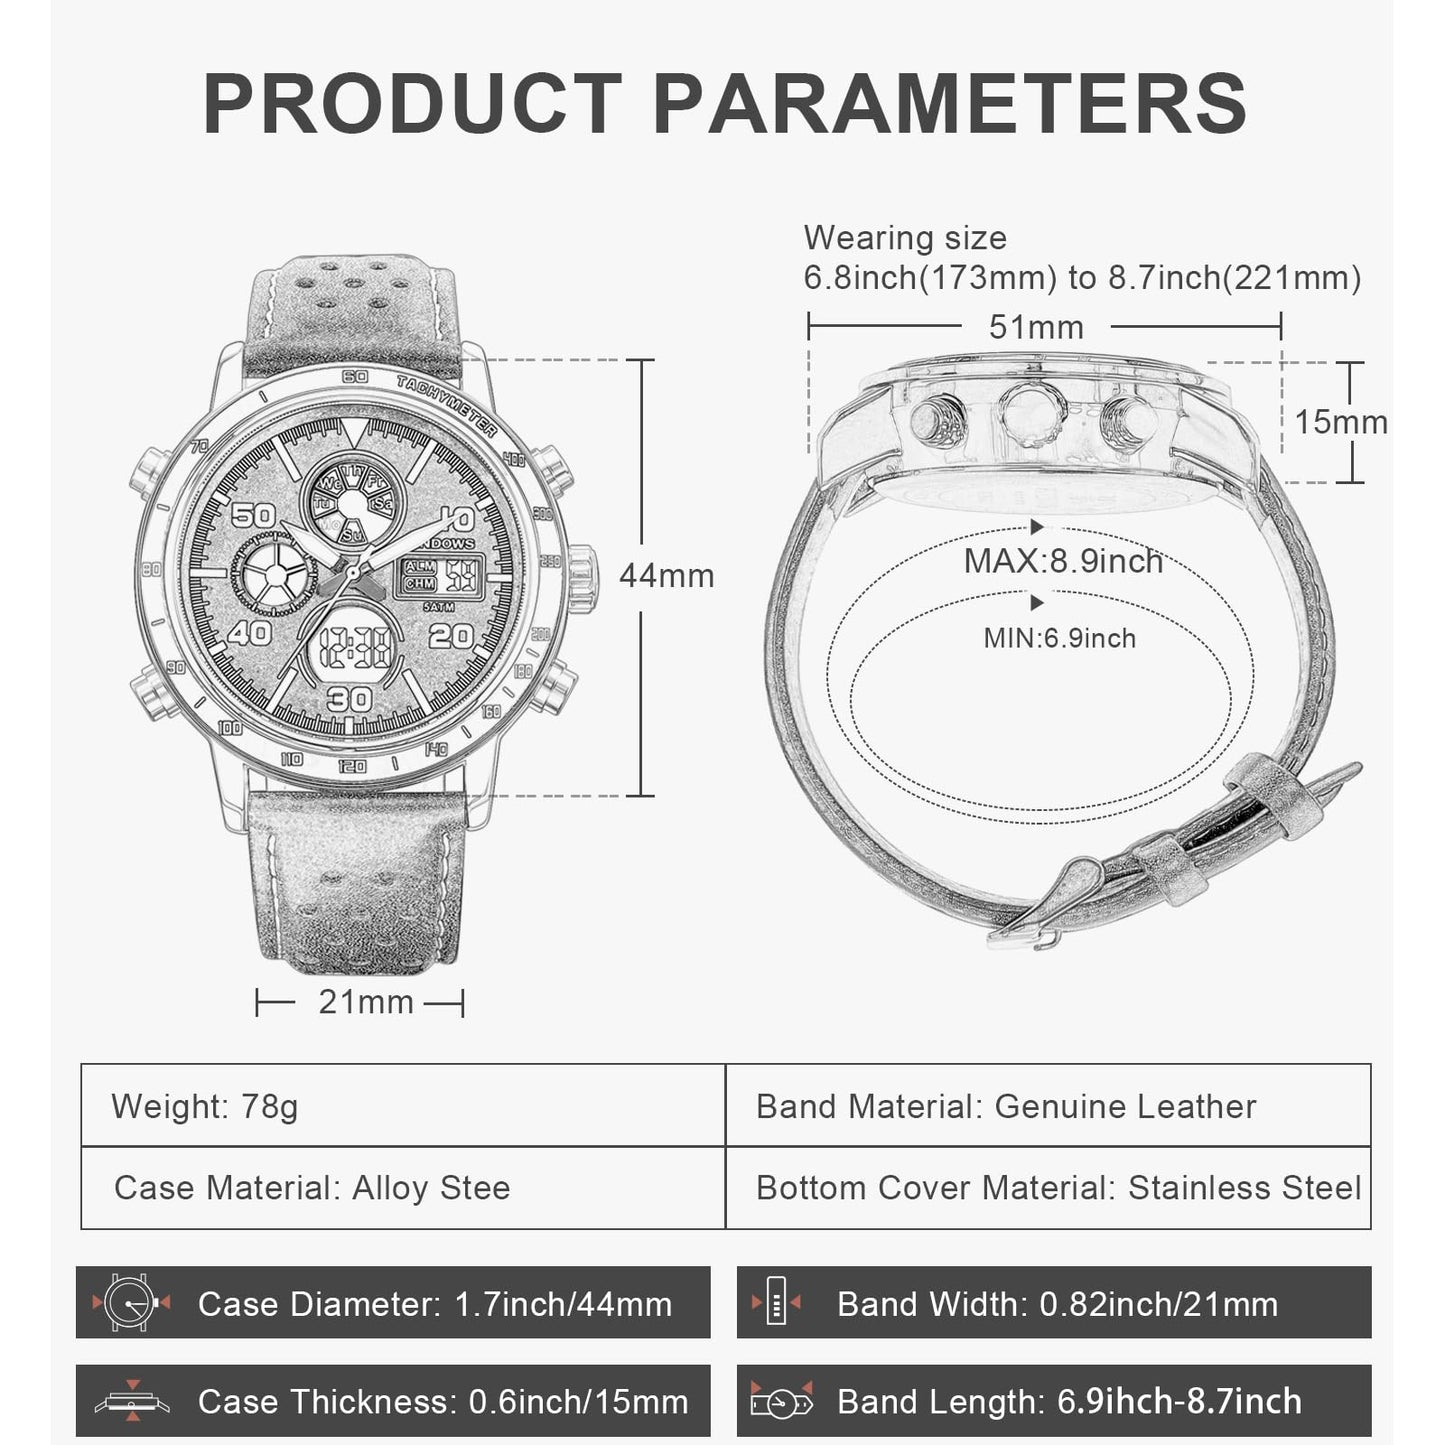 PINDOWS Watches for Men, Outdoor Digital Analog Leather Wristwatch Multifunctional LED Backlight, Alarm Stopwatch Calendar.